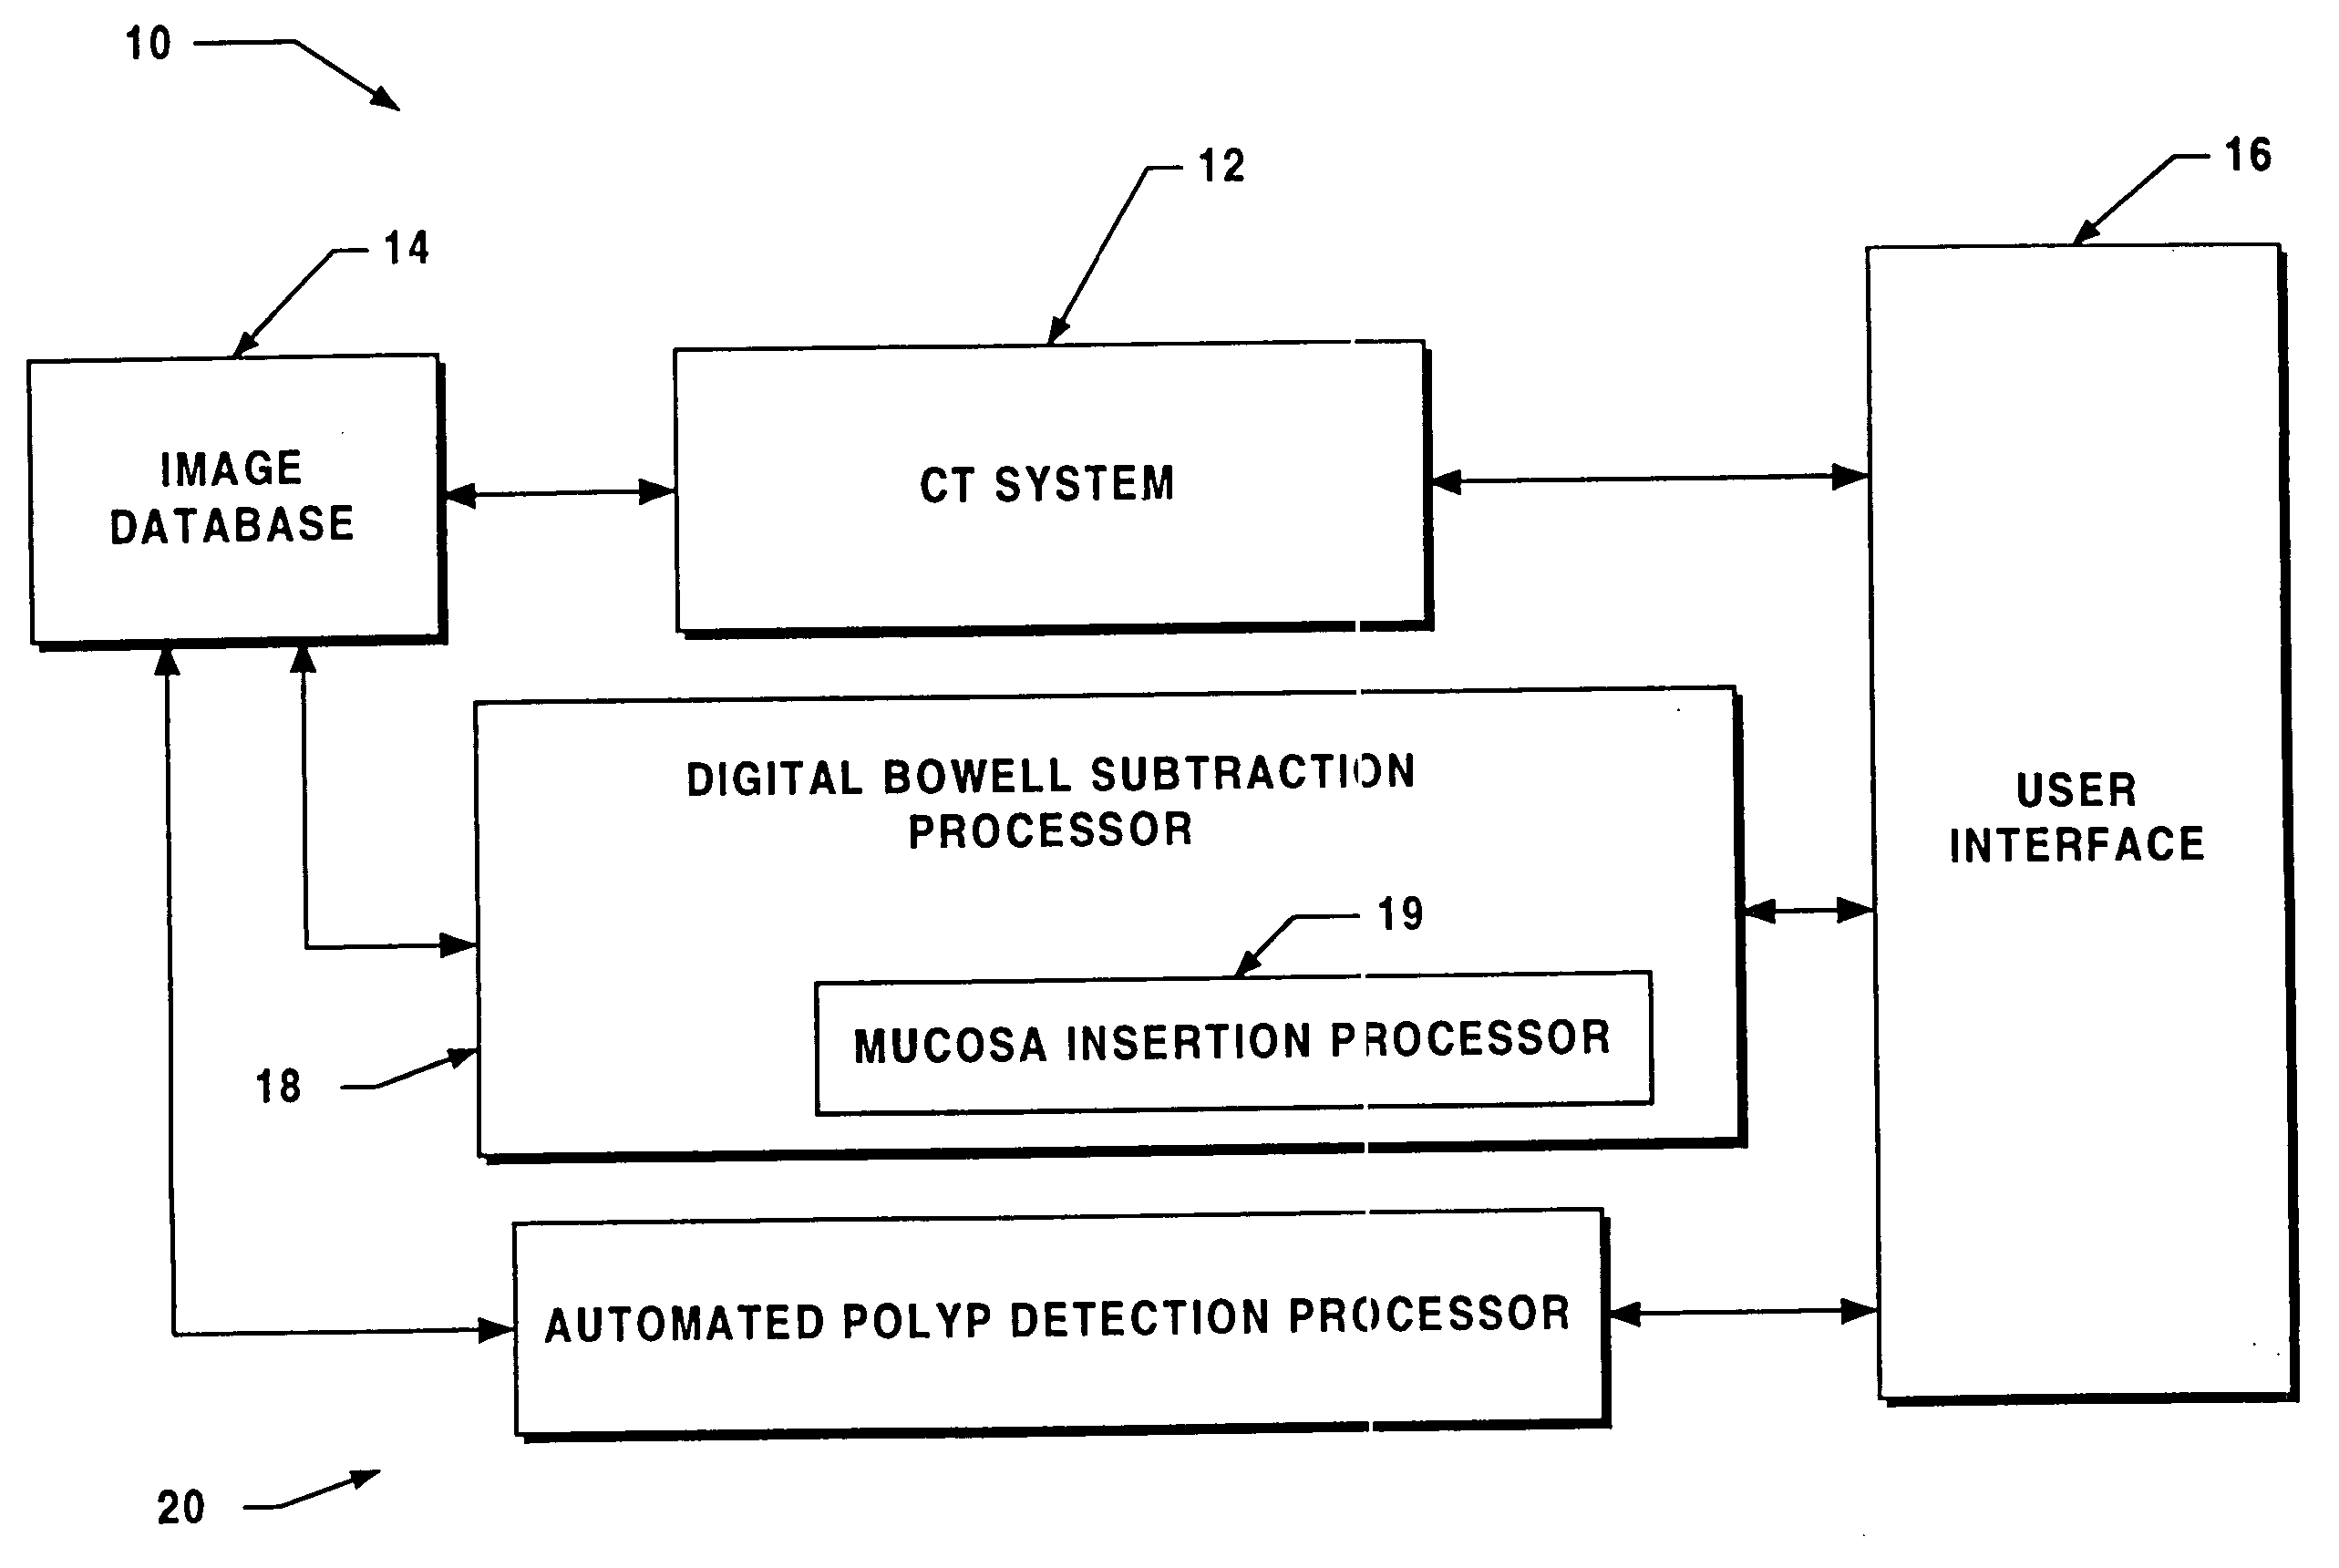 Methods for digital bowel subtraction and polyp detection